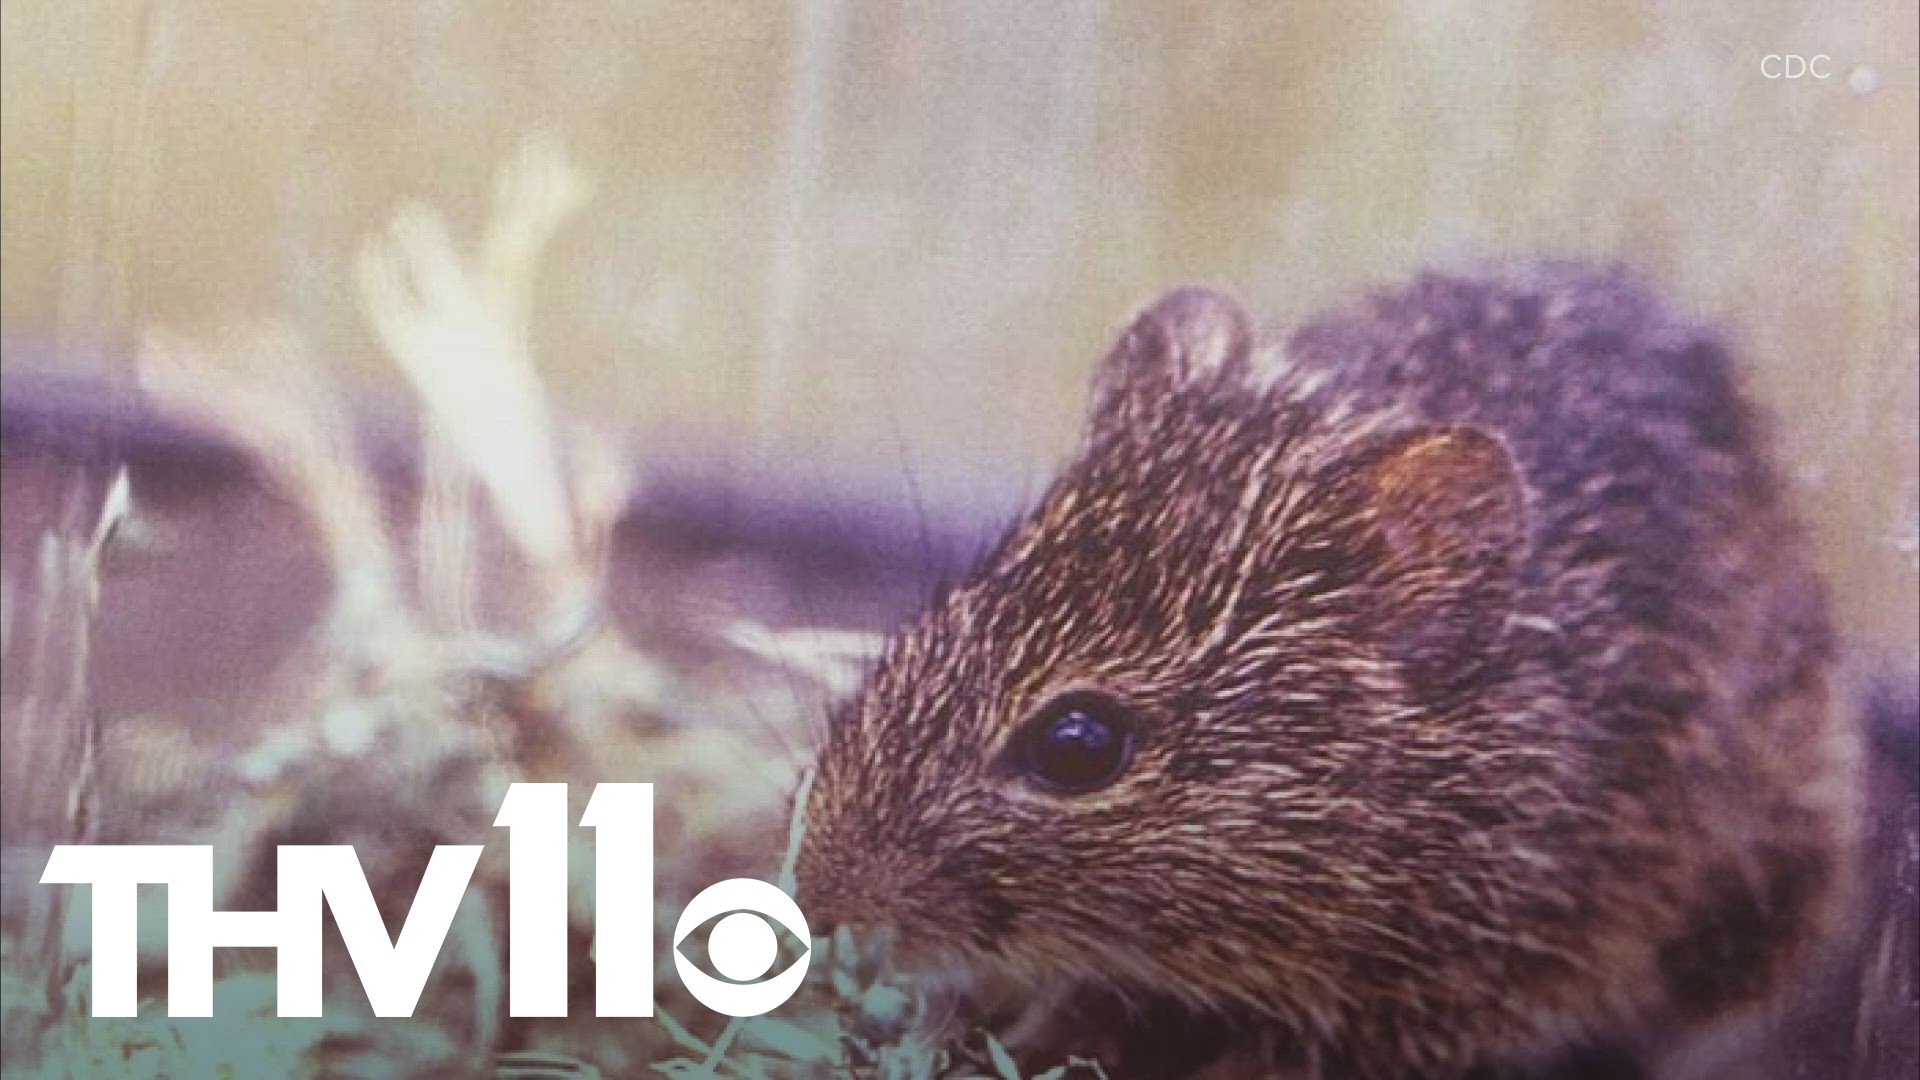 A dangerous virus that is typically found in rodents has now been confirmed in a human here in Arkansas.